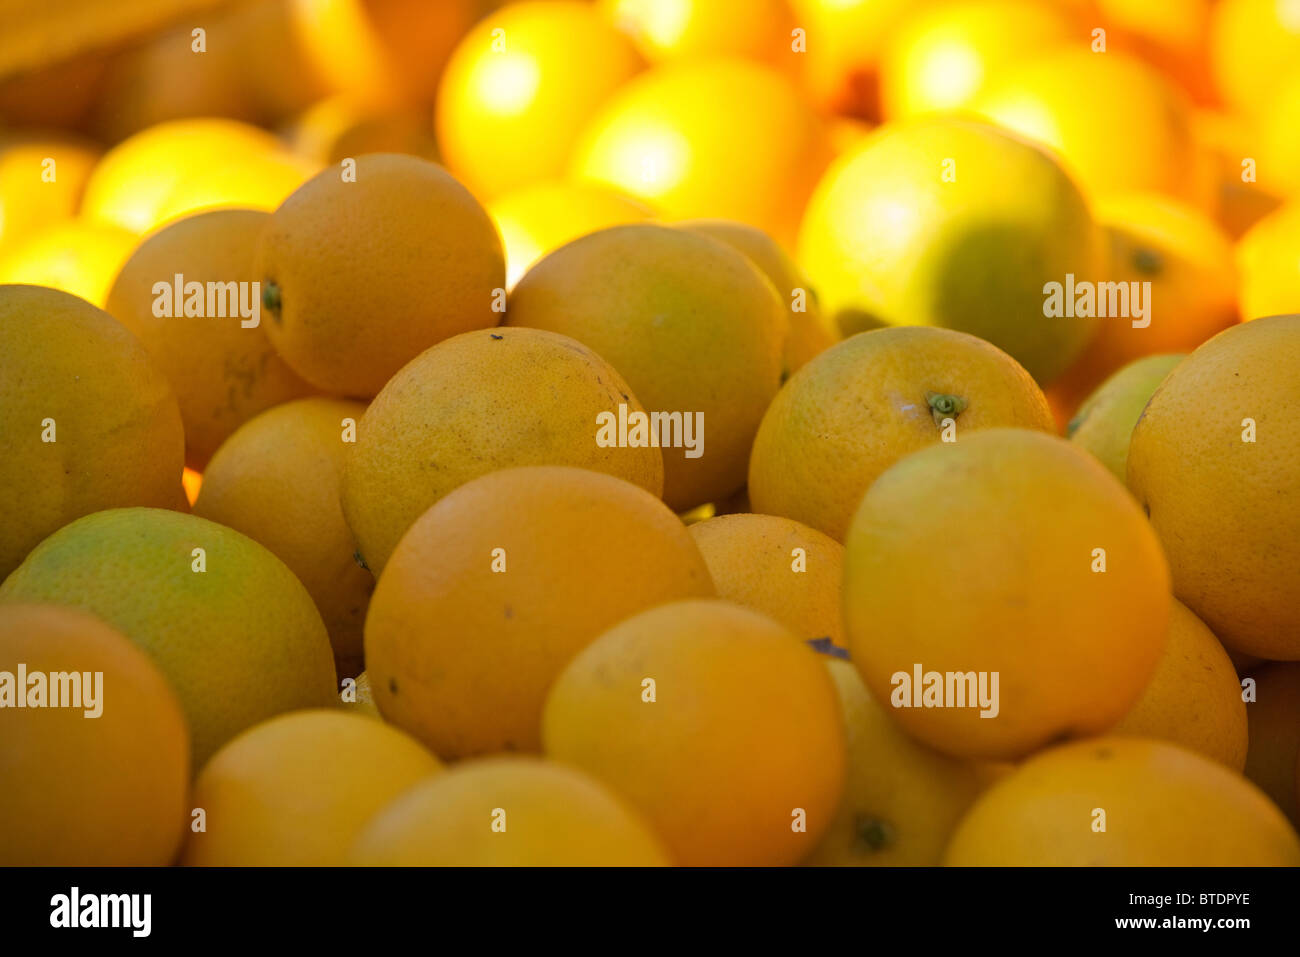 A close up of loose Oranges Stock Photo